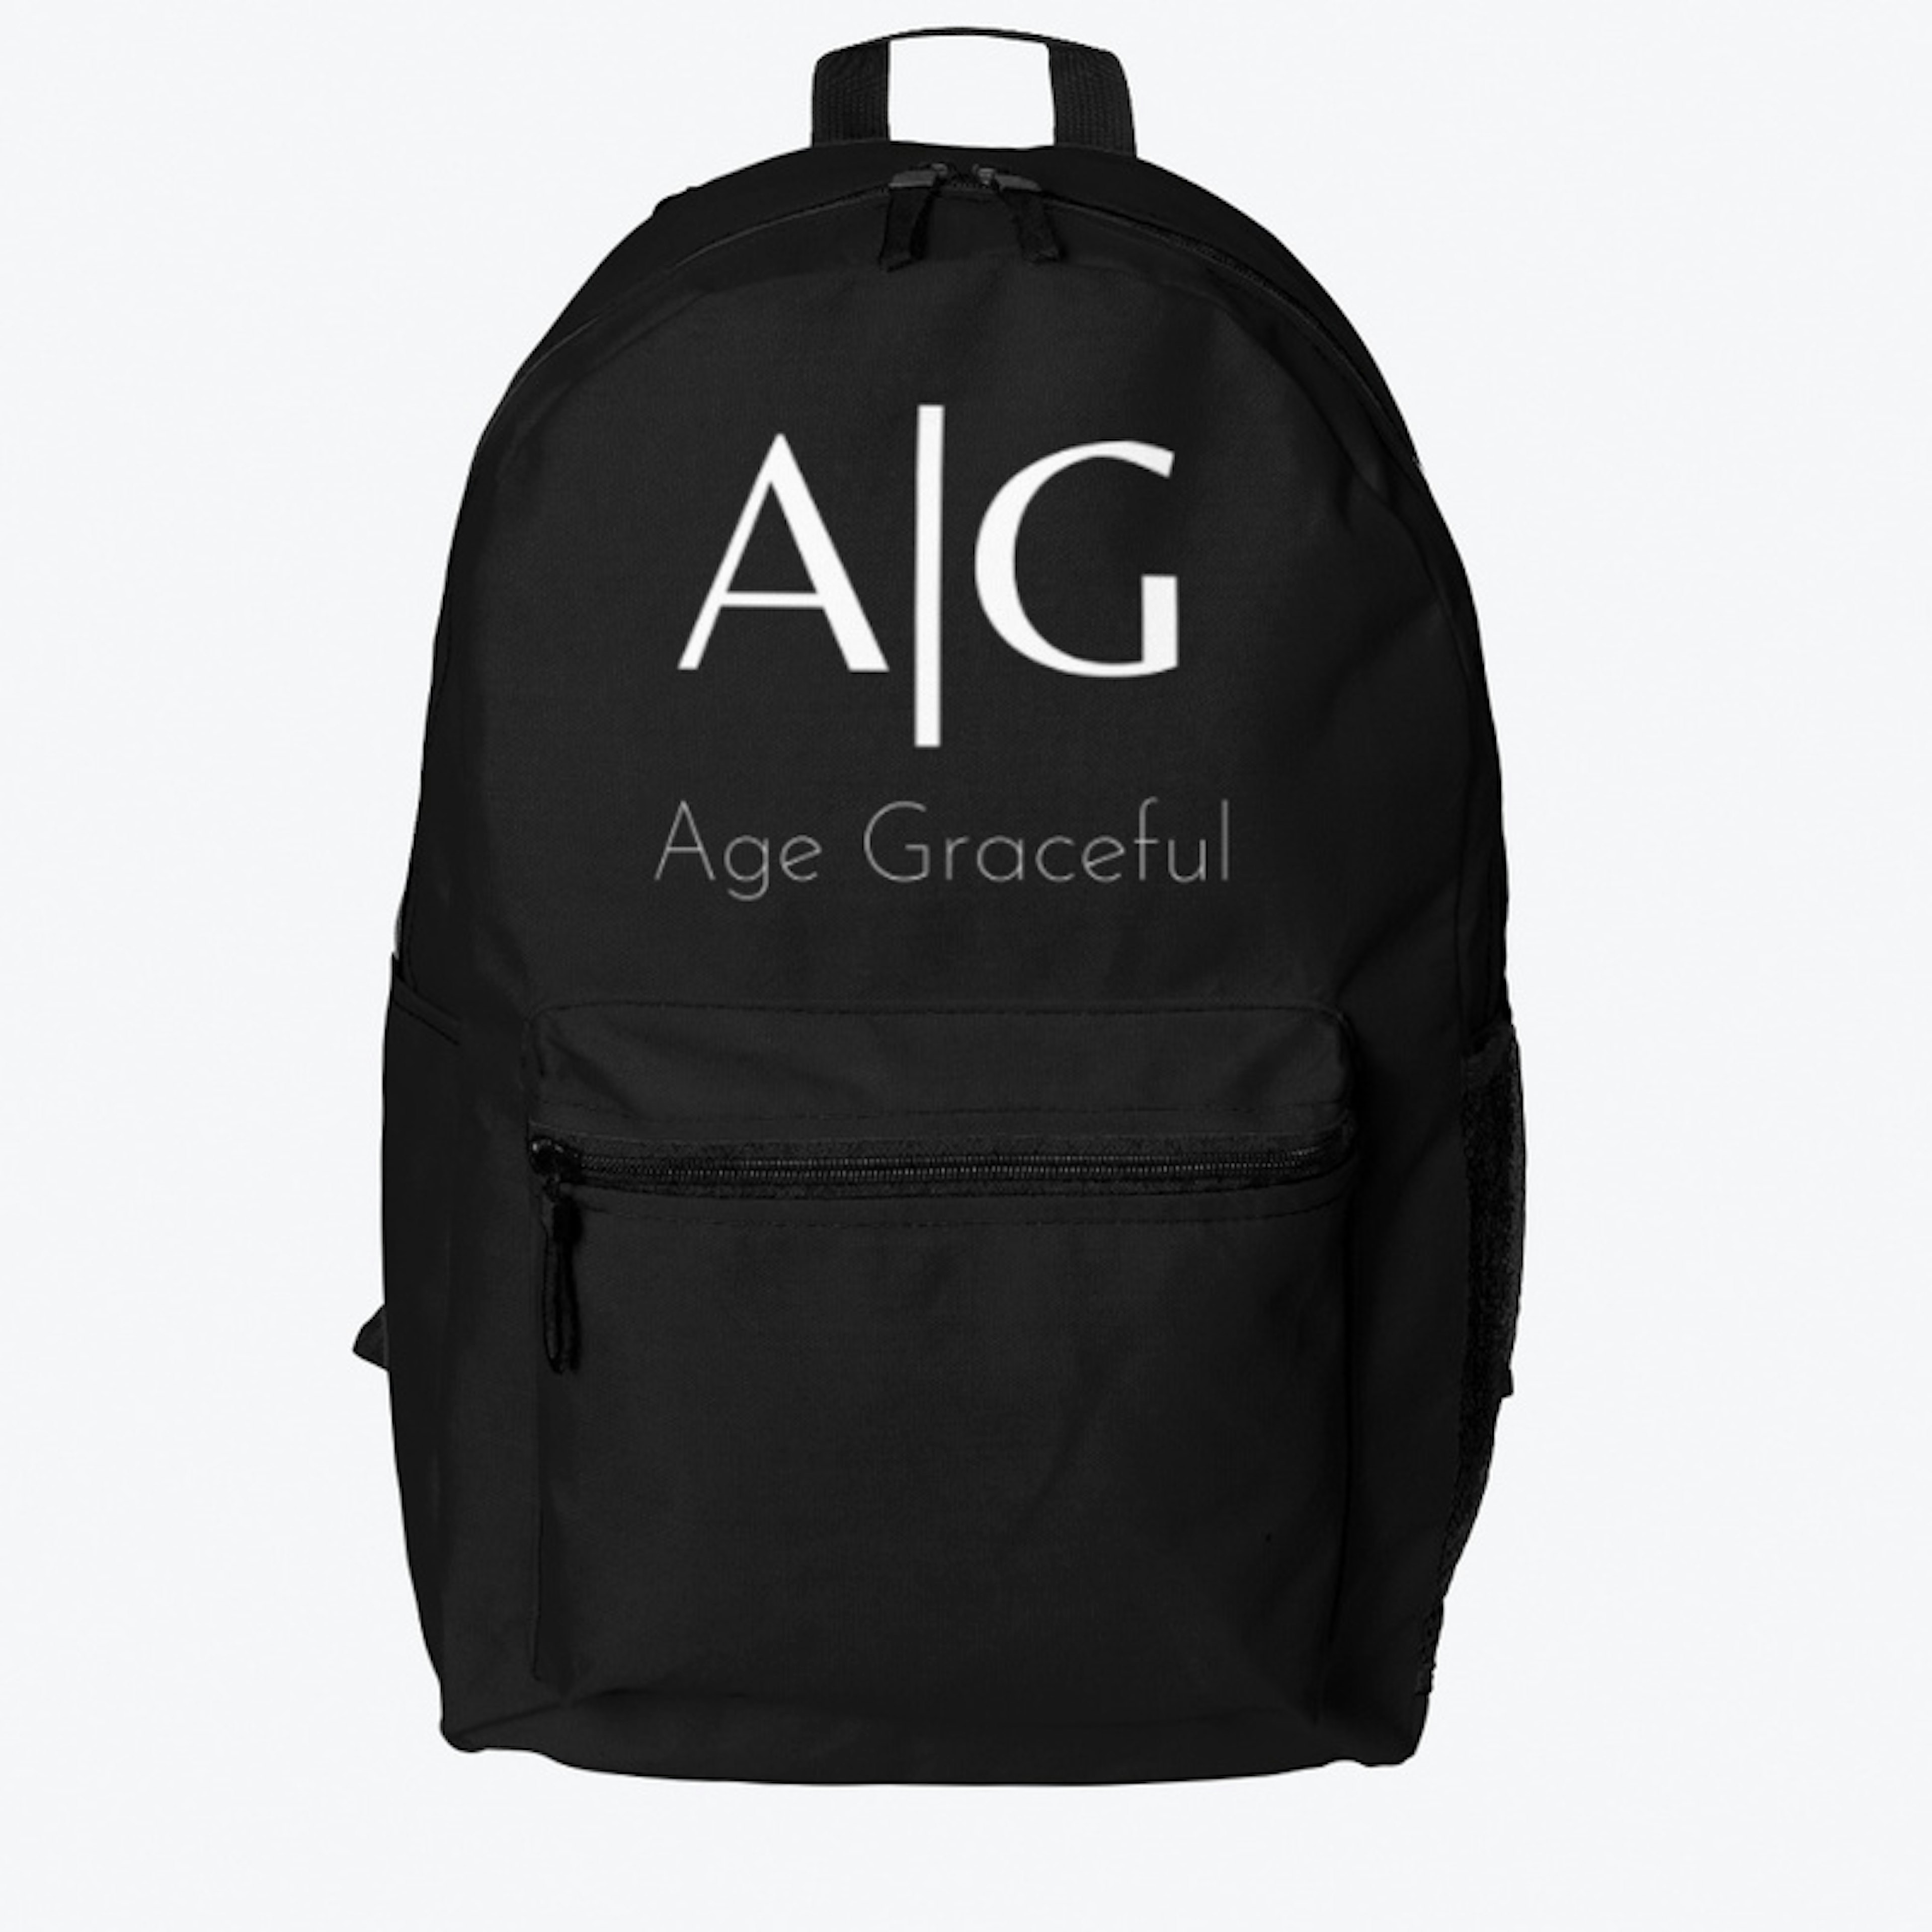 We Age Graceful Classic Backpack